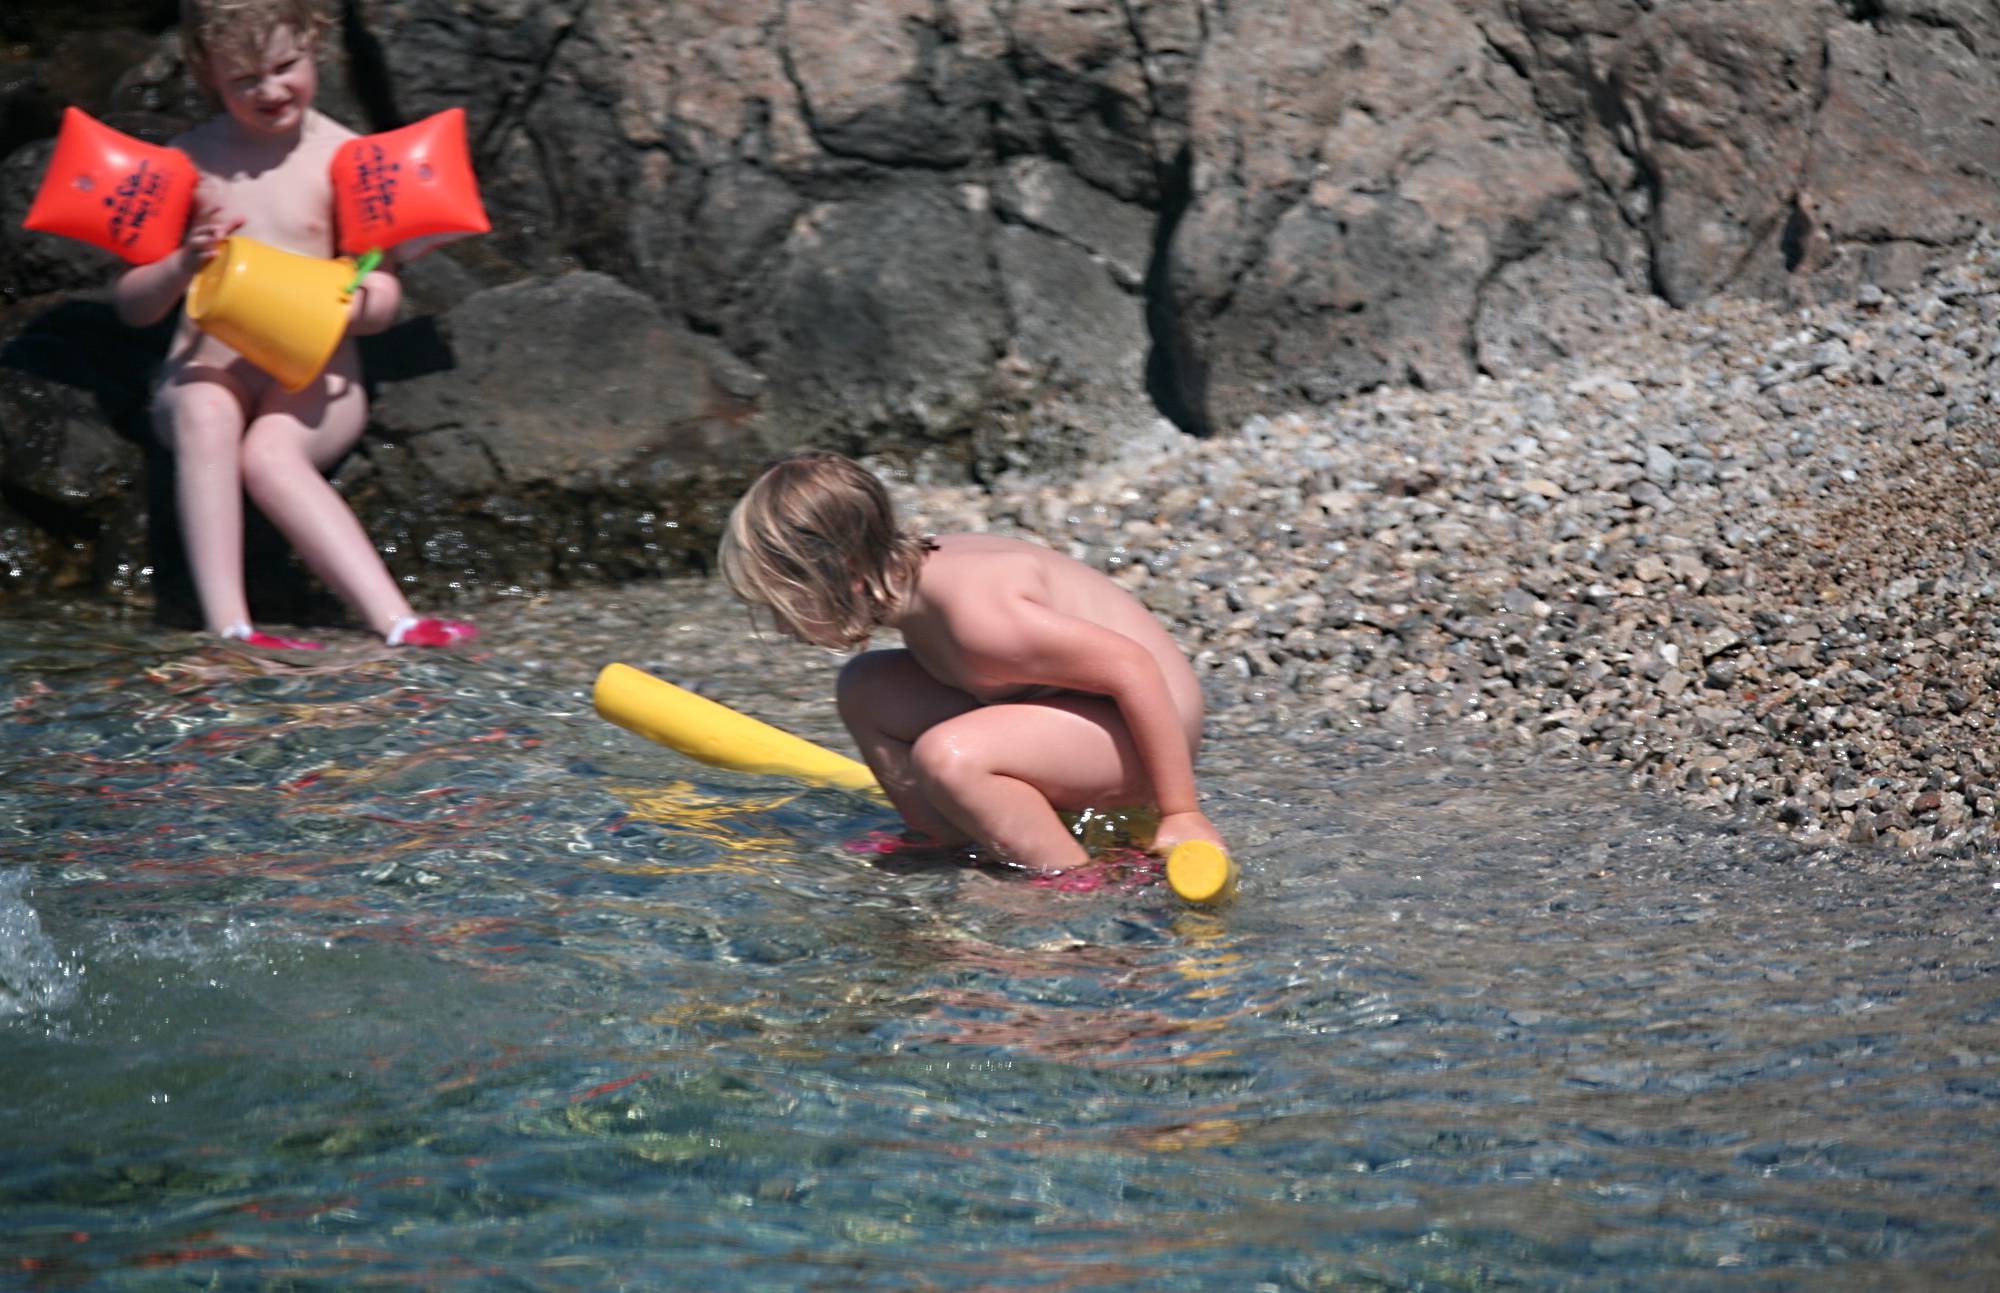 Pure Nudism Photos From Shore to Play Waters - 3